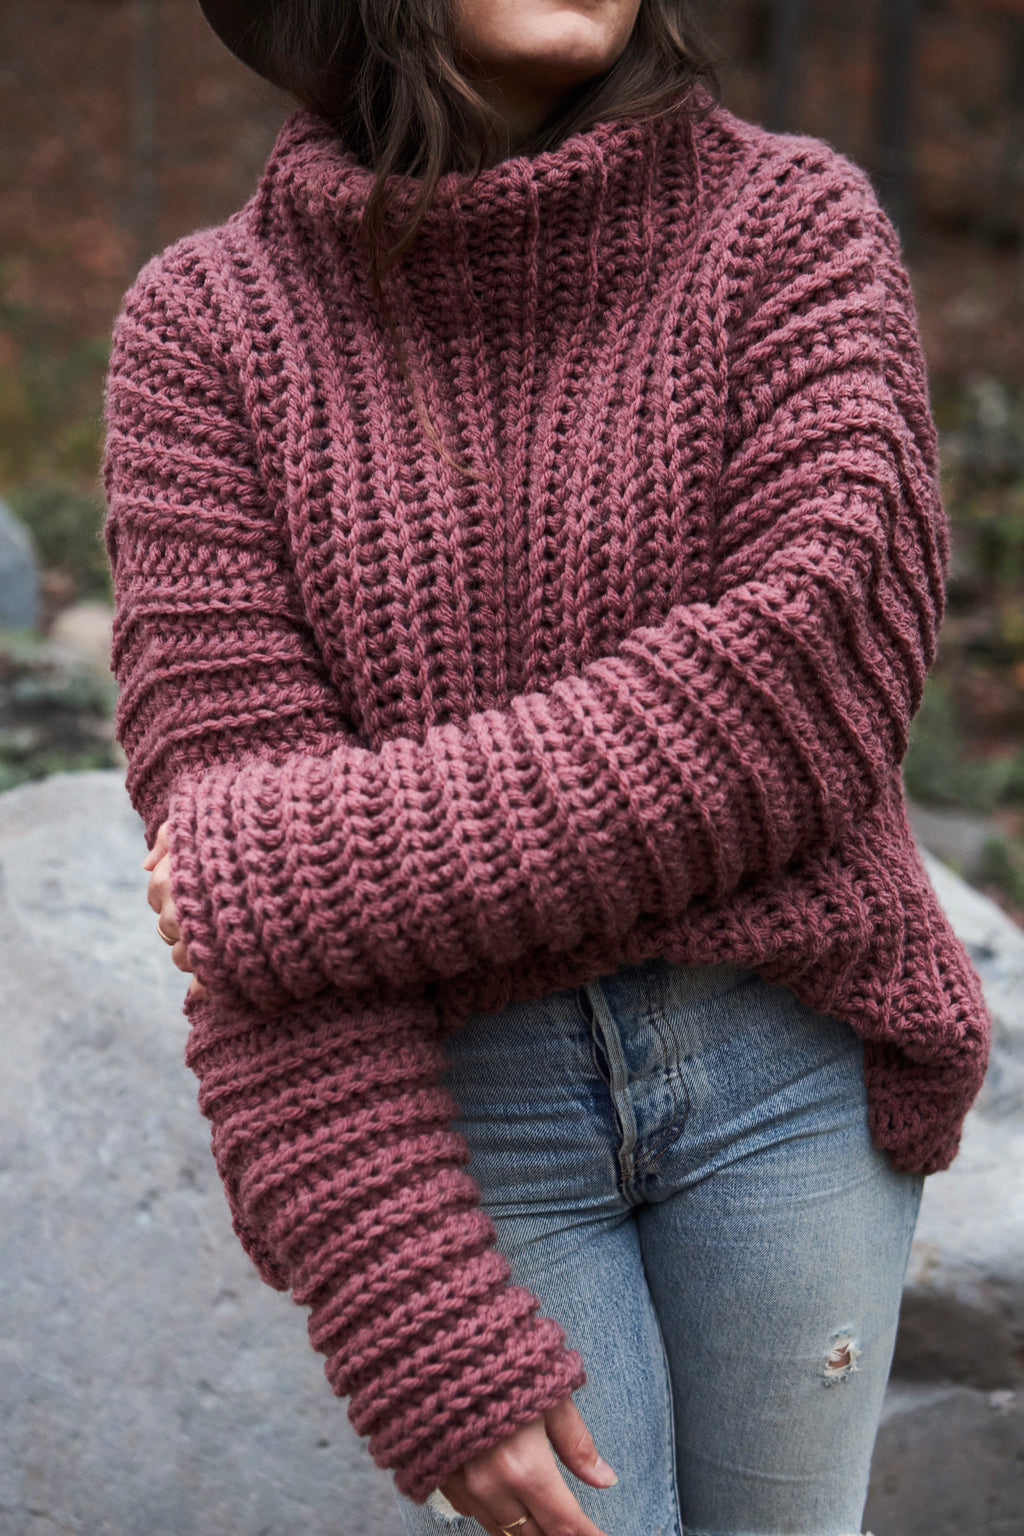 Pattern: The Basic Chunky Slouch - Evelyn And Peter Crochet